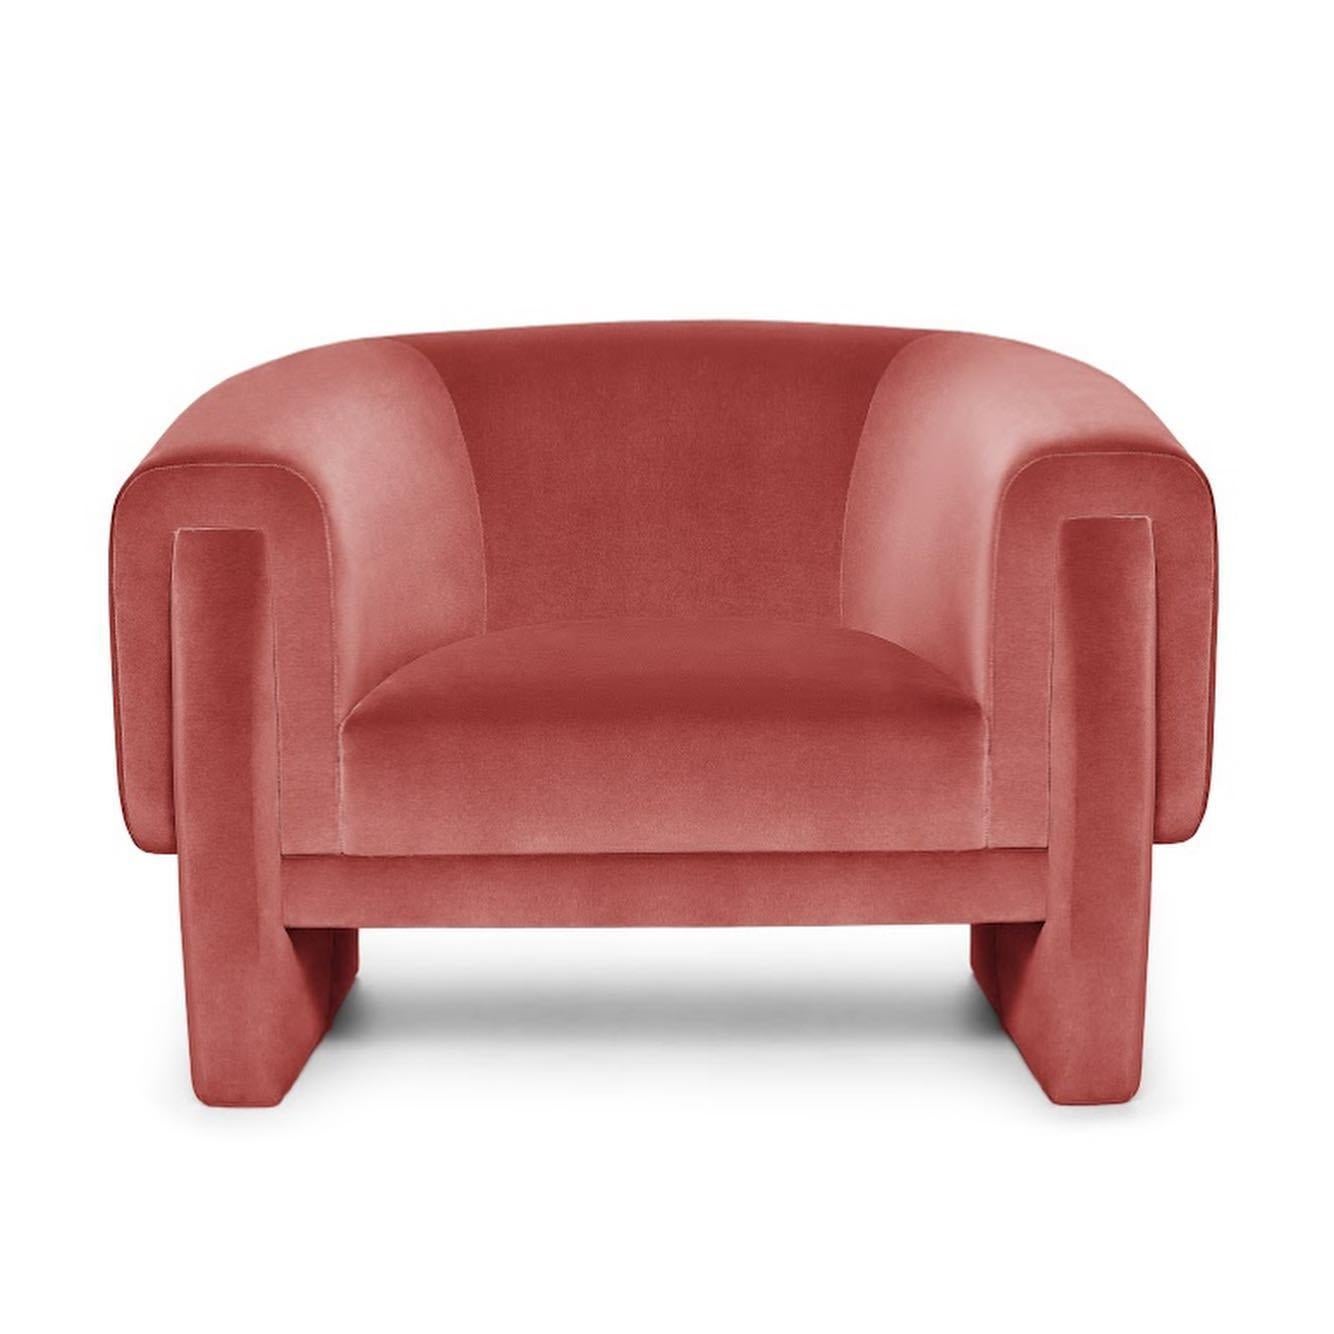 This armchair is a time capsule of style. Taking cues from the most fashionable styles of scarves in history, it’s subtle and layered composition create a dynamic and effortlessly stylish presence. From the half round composition of the arms, to its